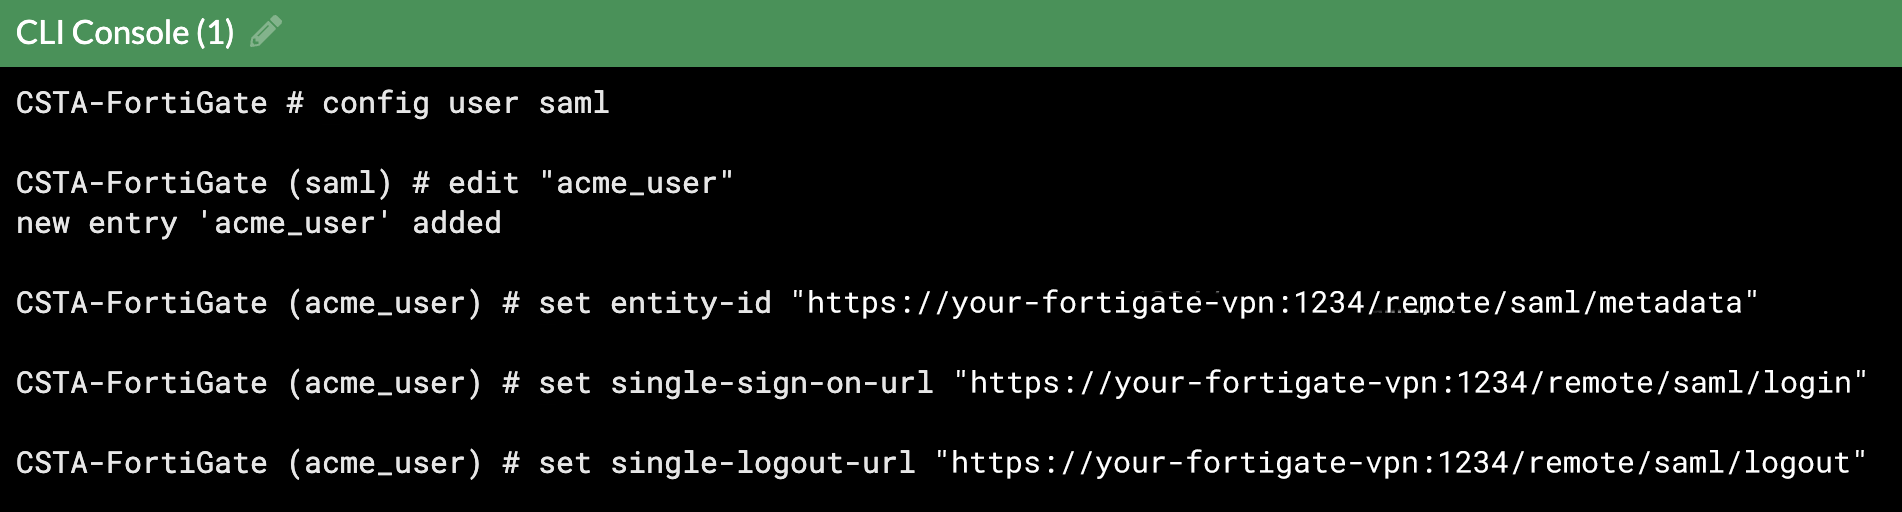 Fortinet FortiGate URLs Added to CLI Console